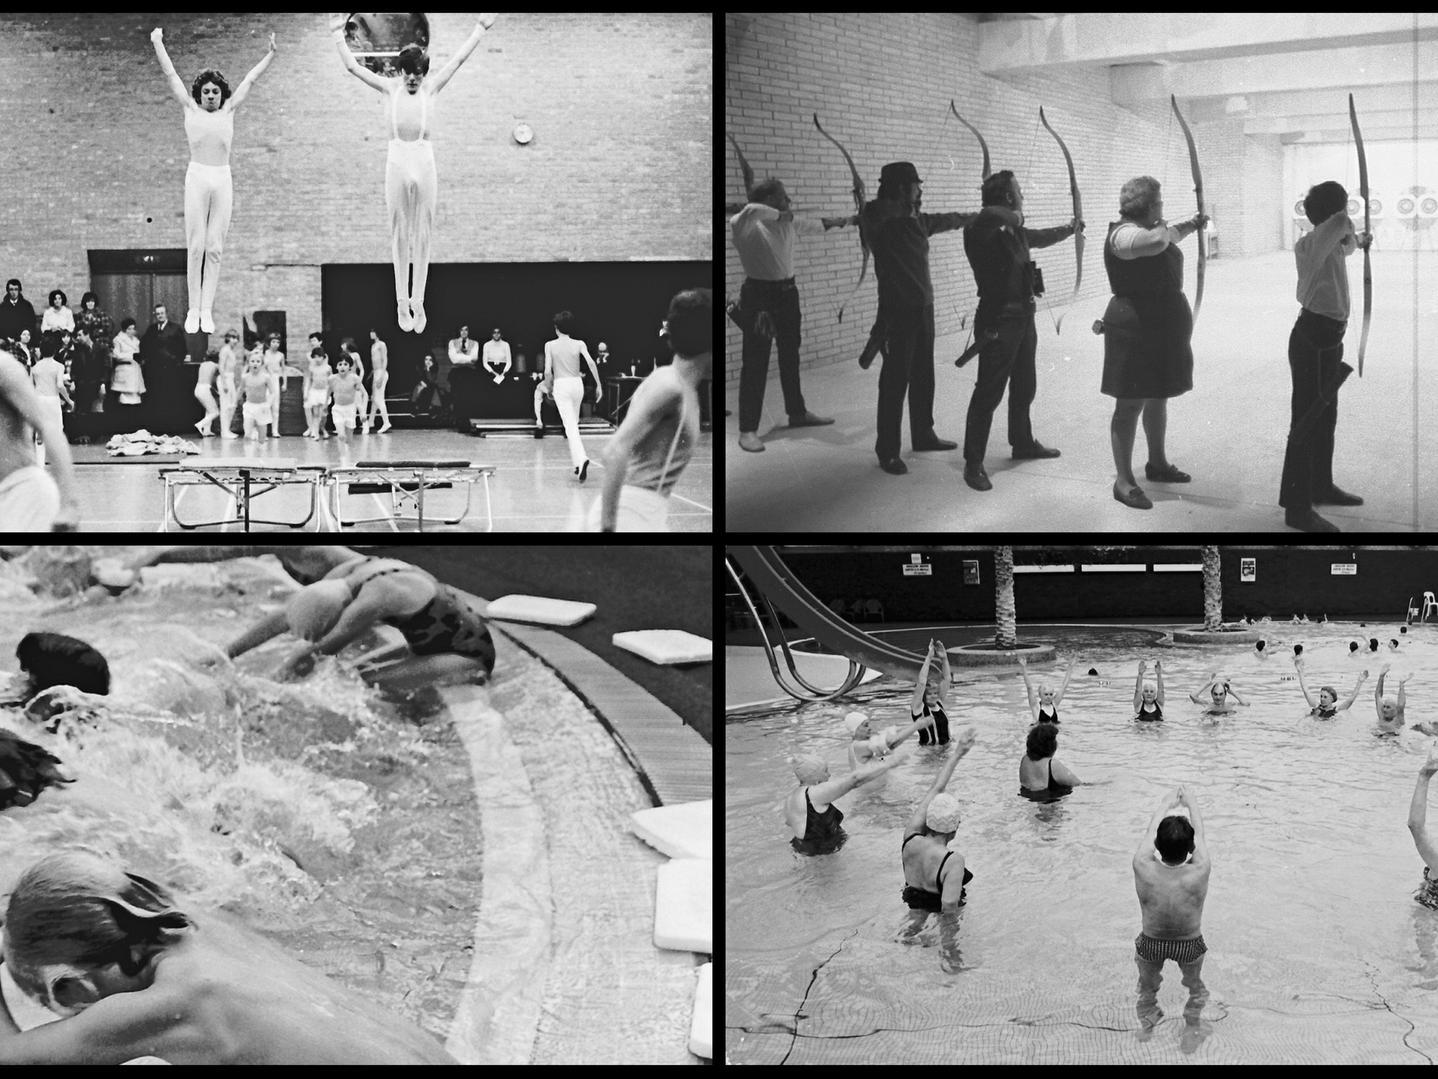 New year, new you at Bletchley Leisure Centre back in the 70s and 80s